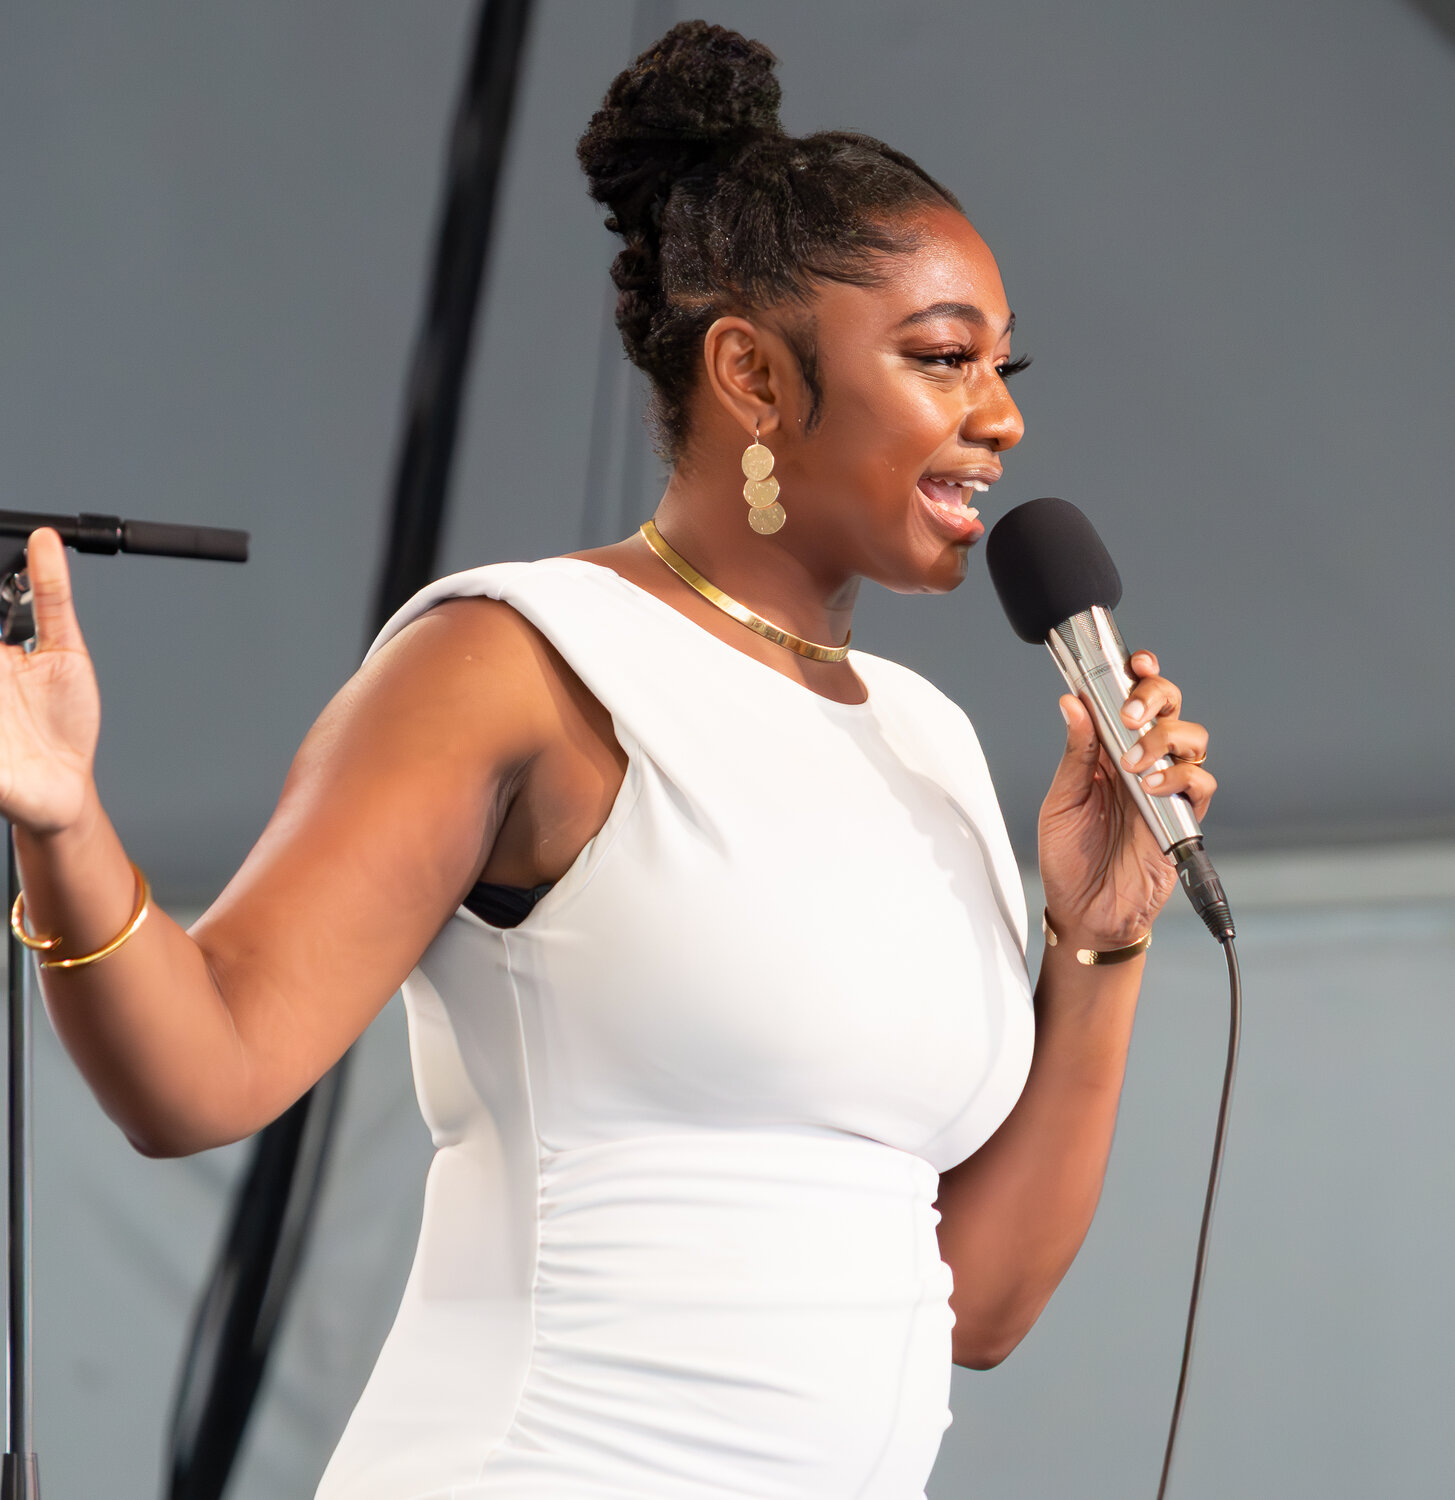 Samara Joy connects with the crowd at the Newport Jazz Festival during her set on the Quad stage on August 6. During her set, she sang jazz standards including If You Never Fall in Love with Me, Stardust, and Linger Awhile.